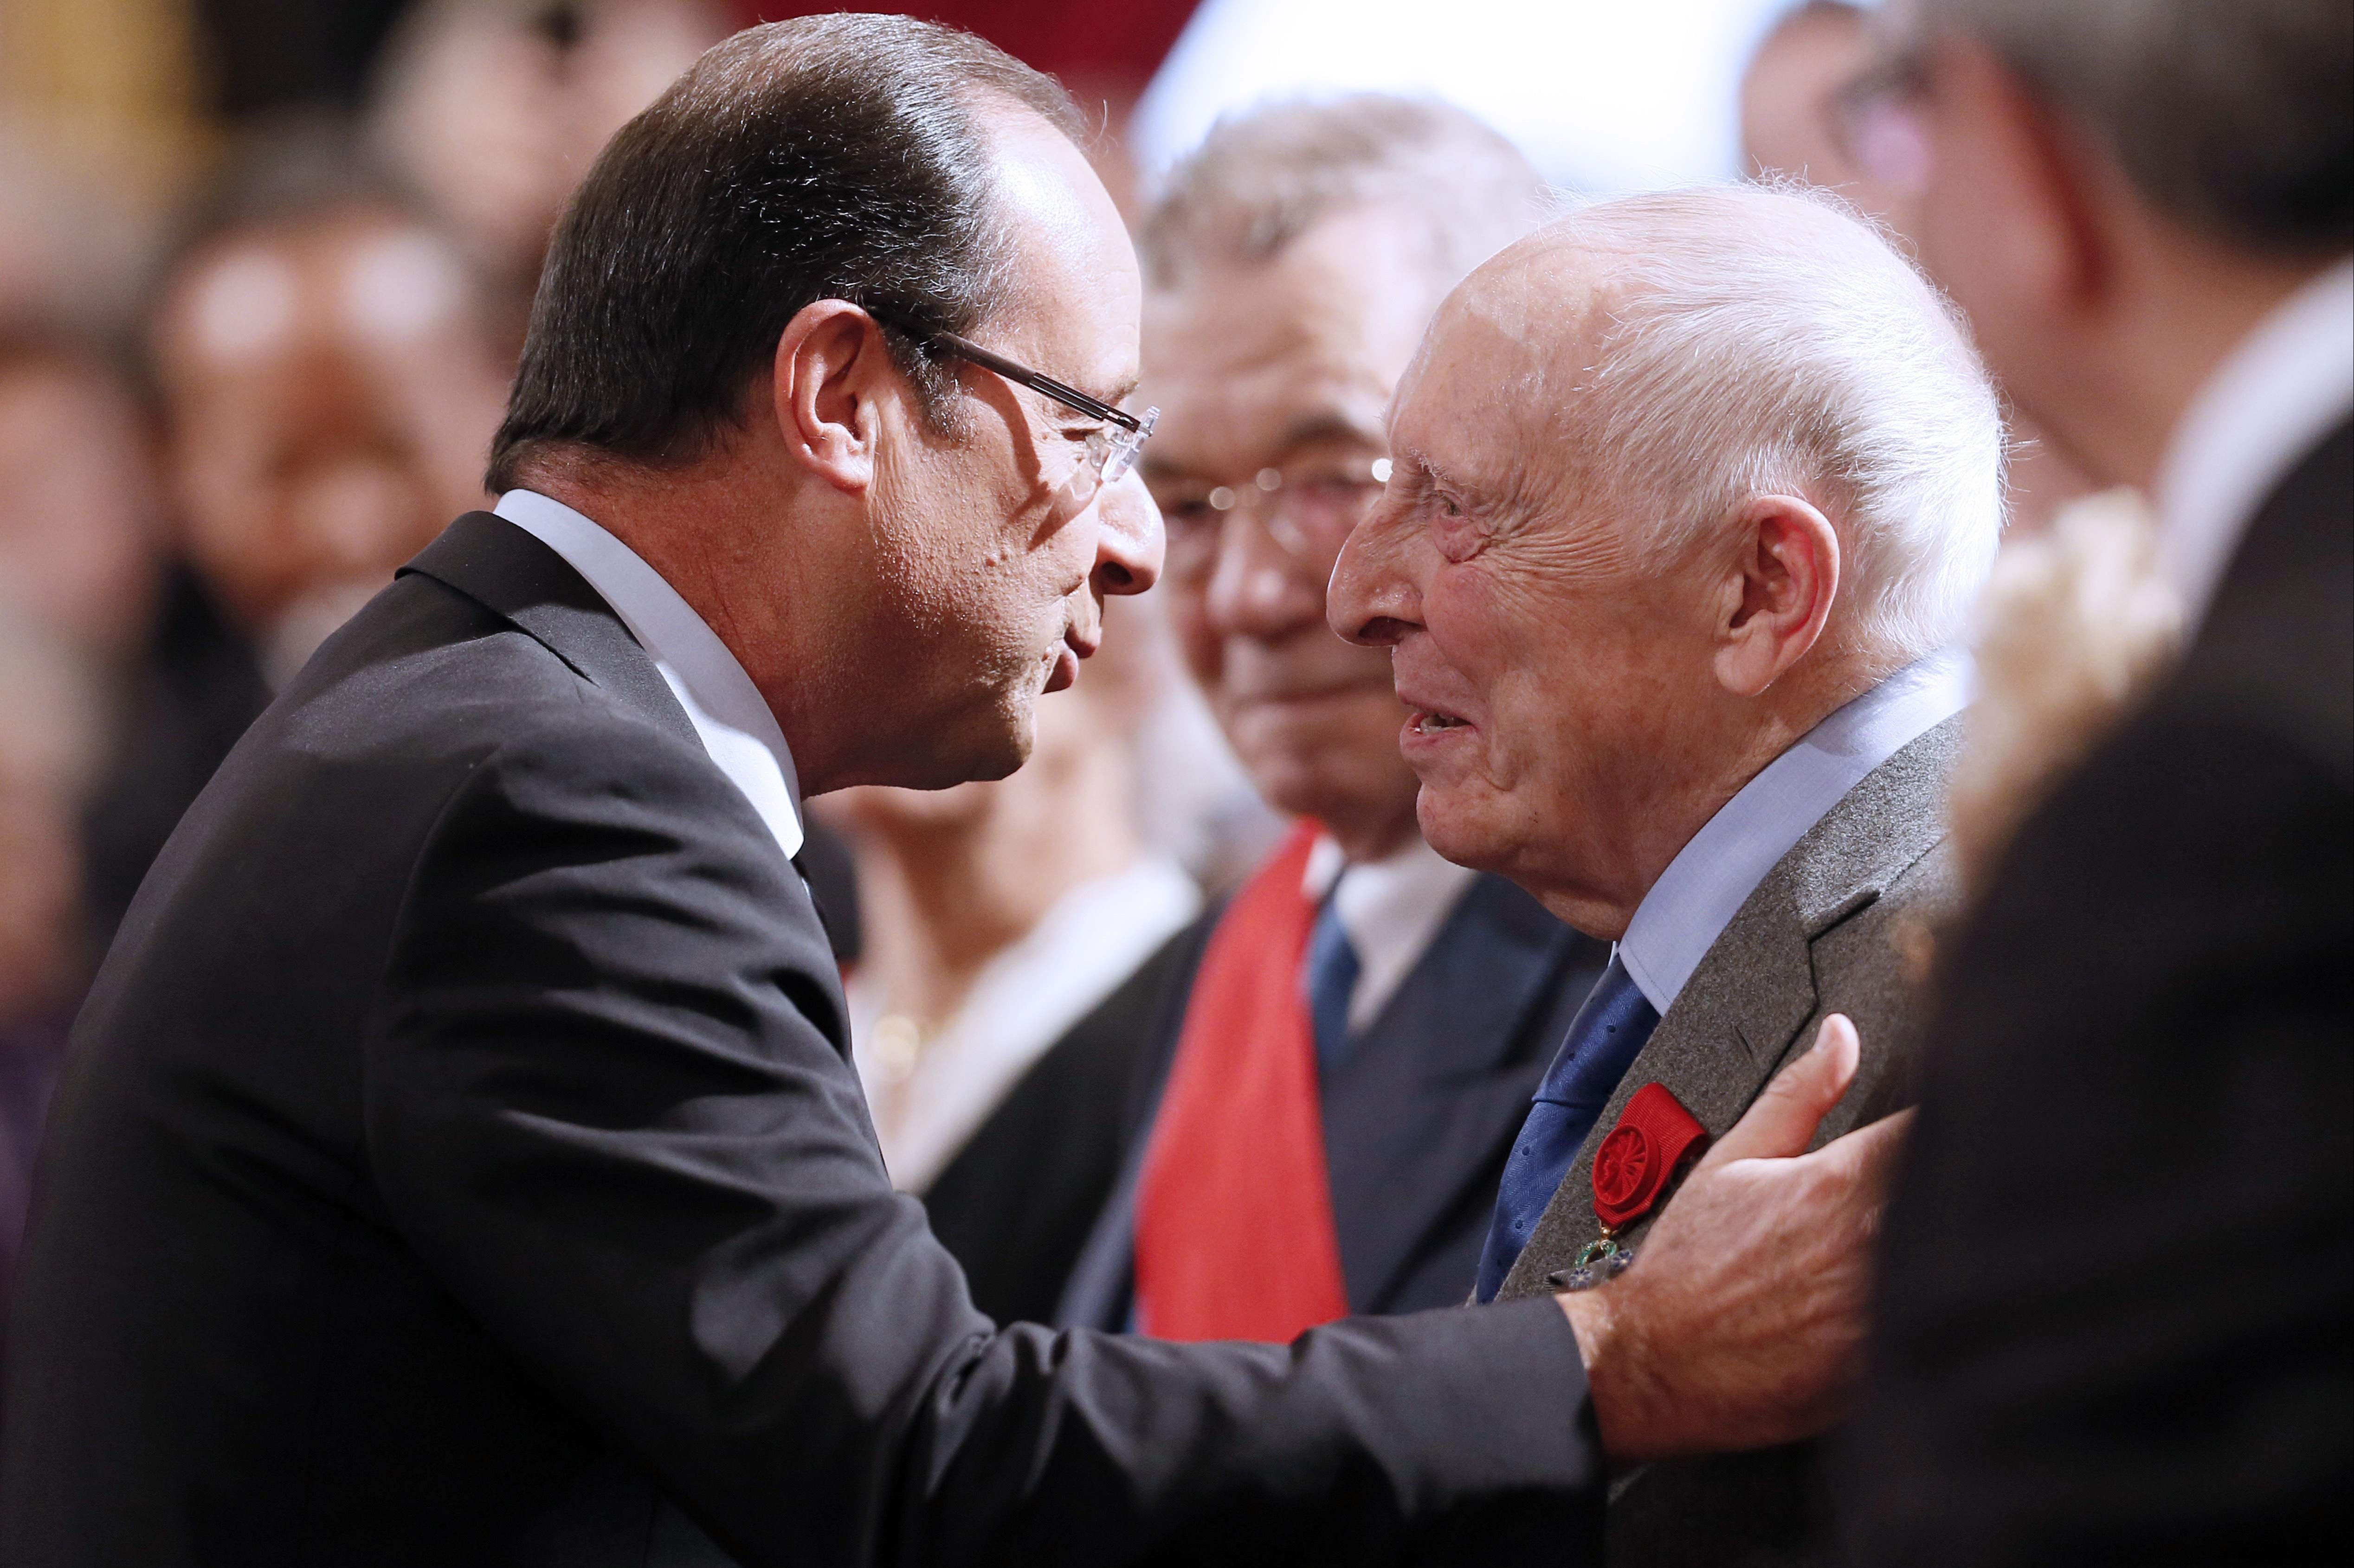 Cordier is greeted by the then French president Francois Hollande during a ceremony in Paris in 2012